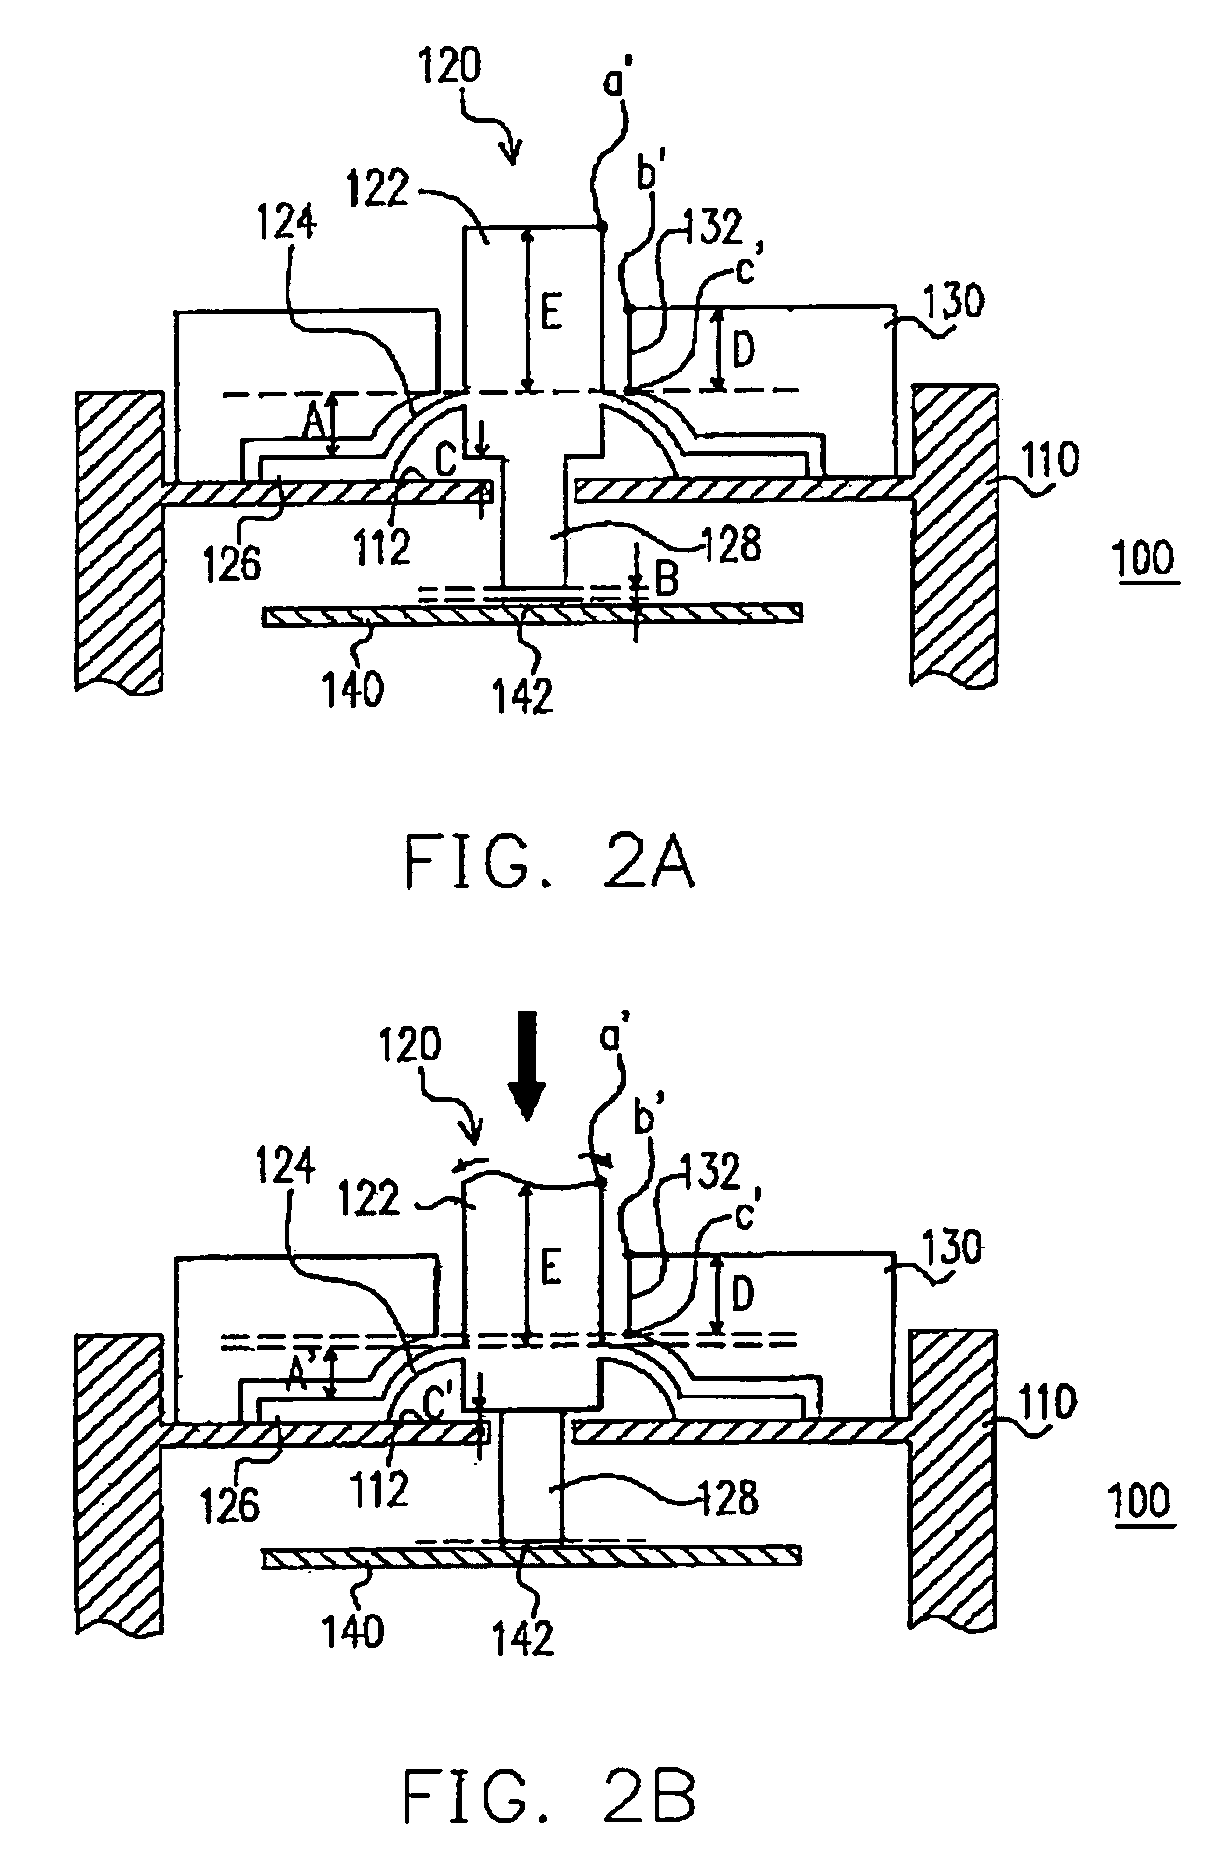 Button structure and design method for latching prevention